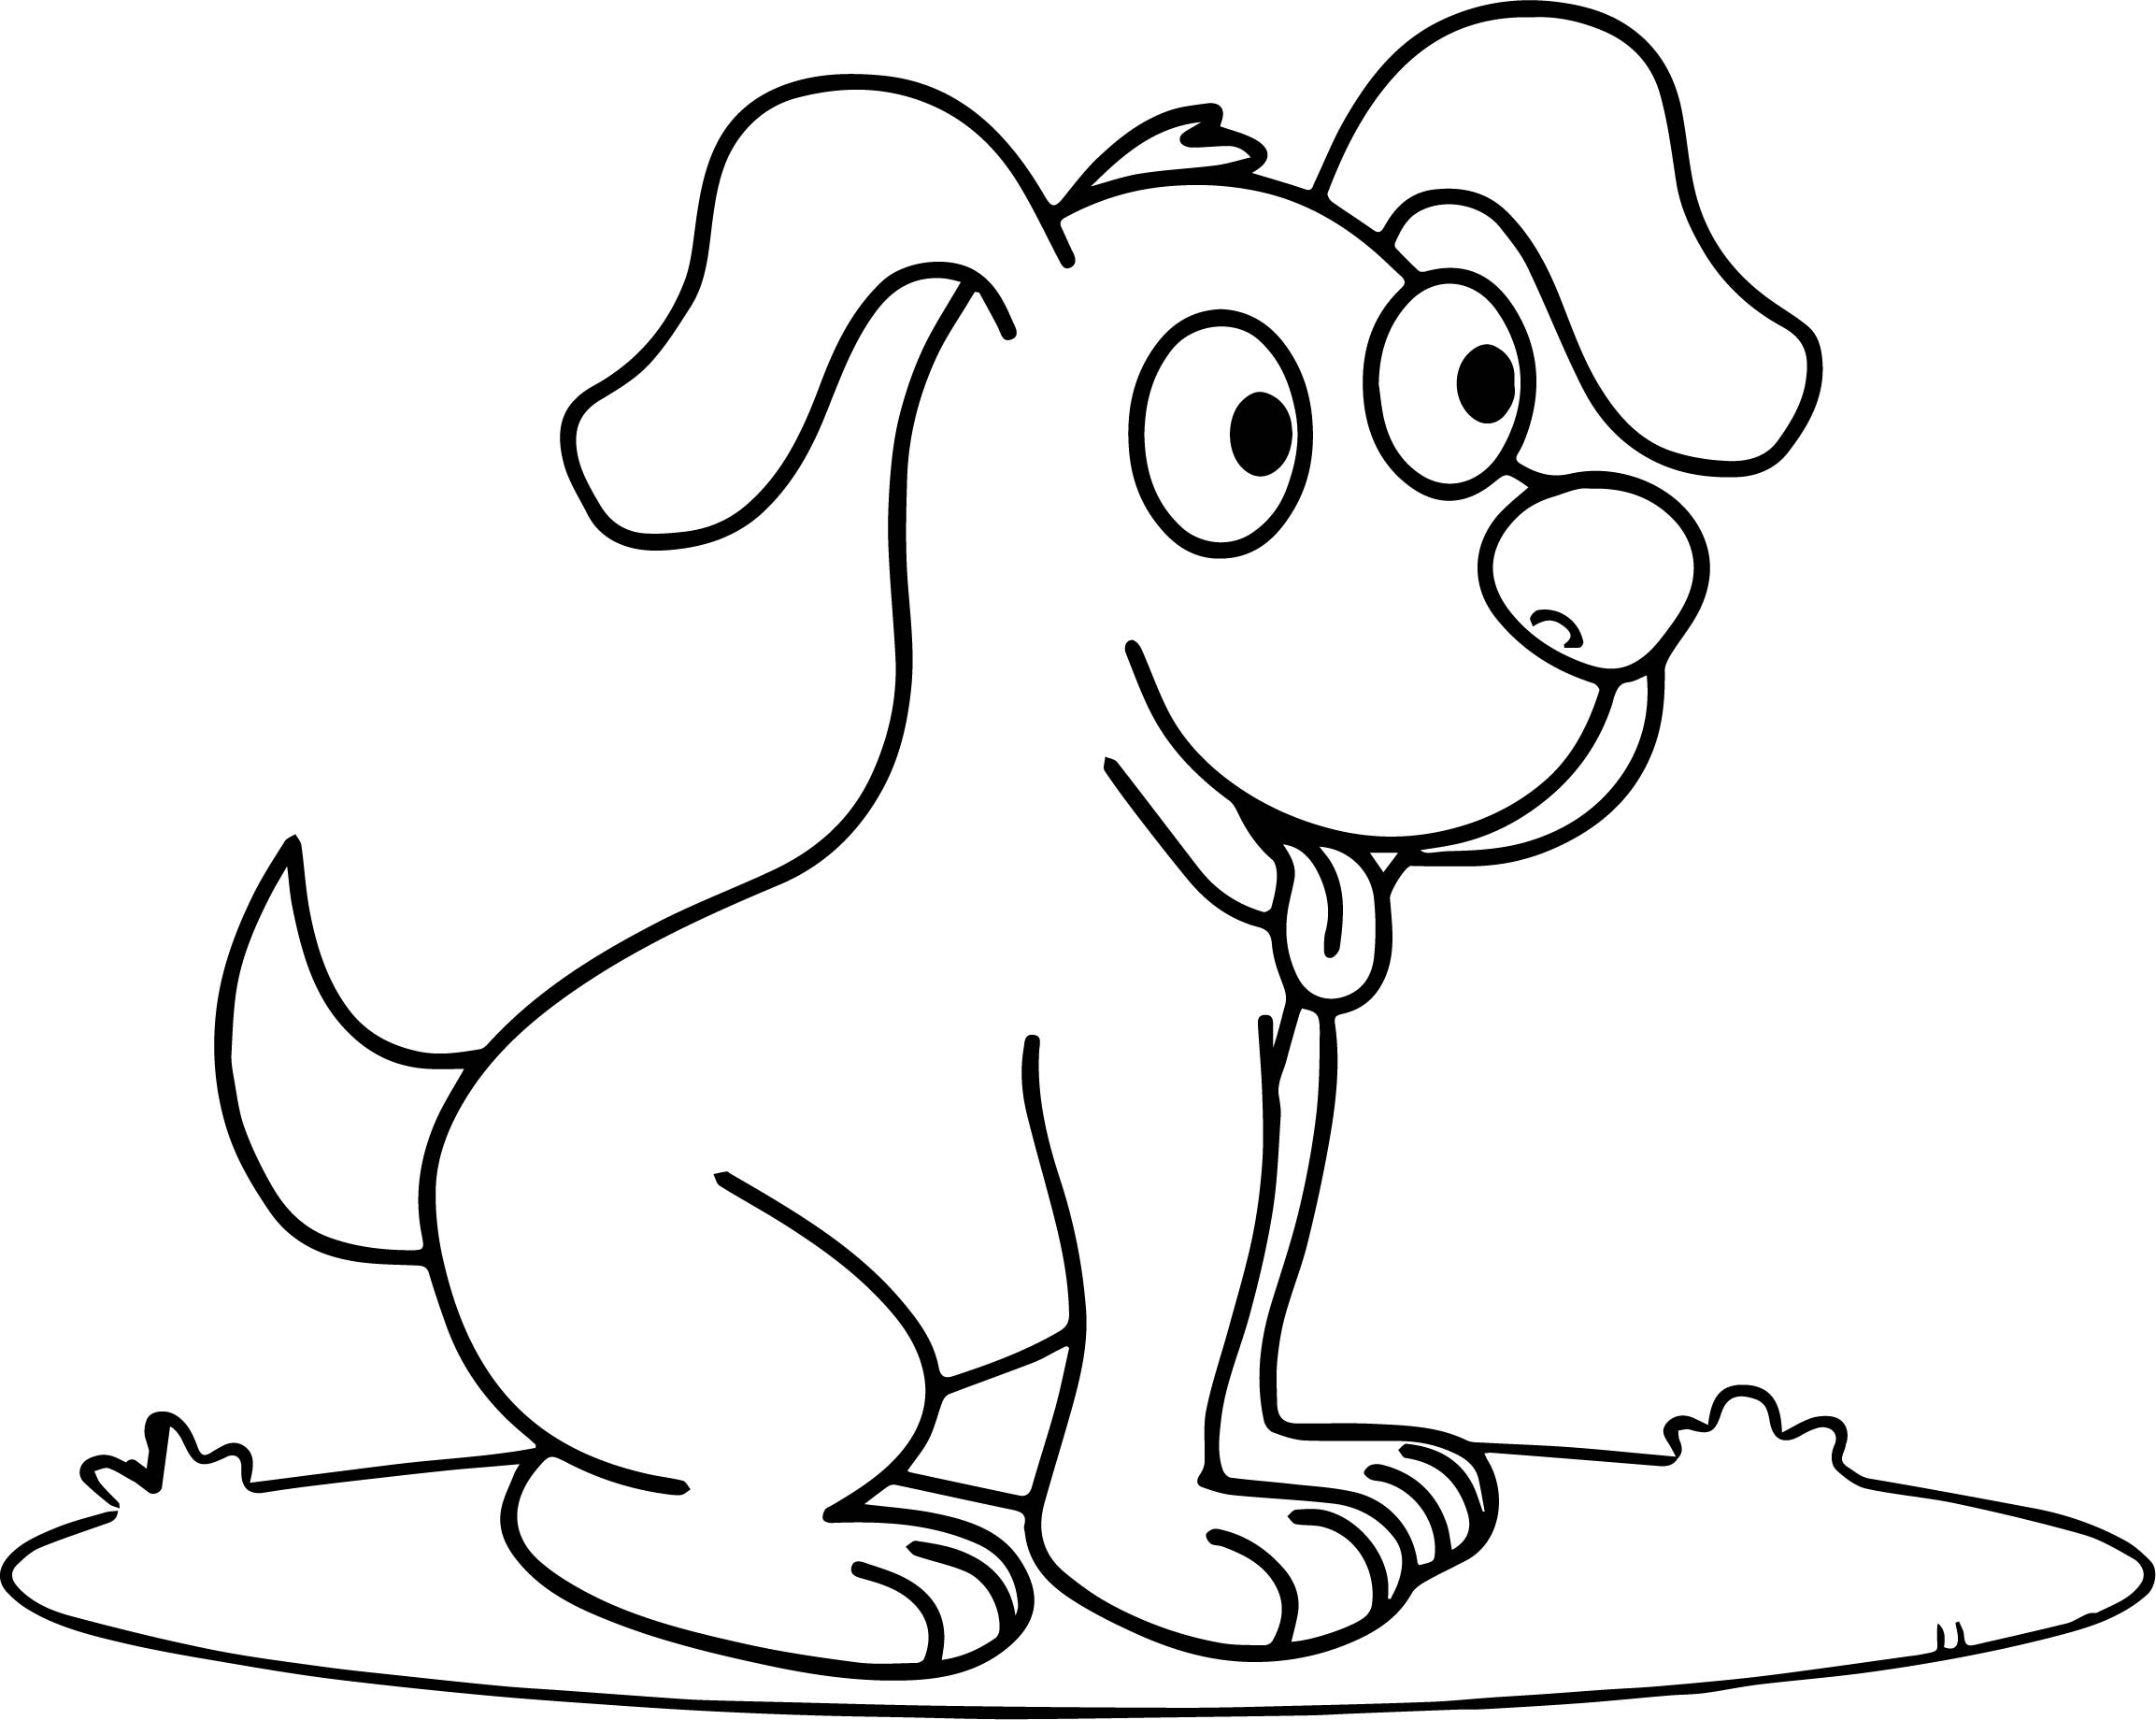 Funny Dog Coloring Pages at GetColorings.com | Free printable colorings